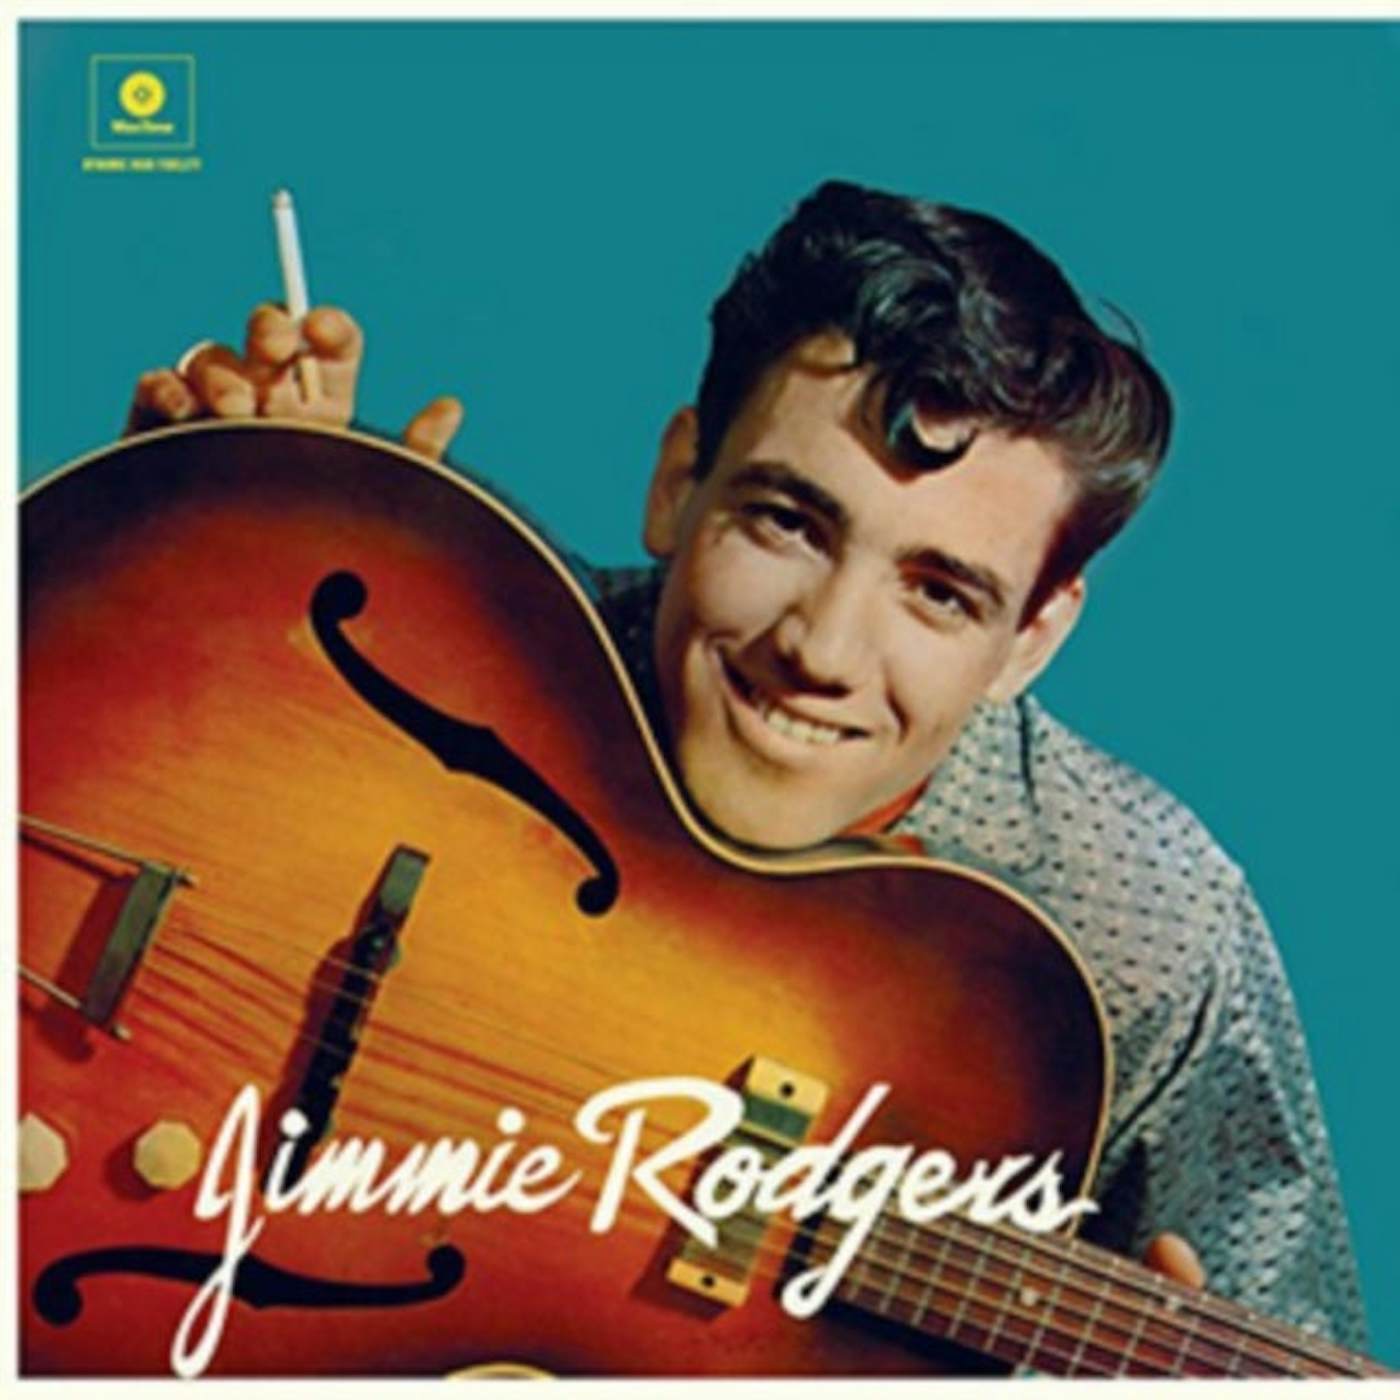 Jimmie Rodgers LP Vinyl Record - Jimmie Rodgers